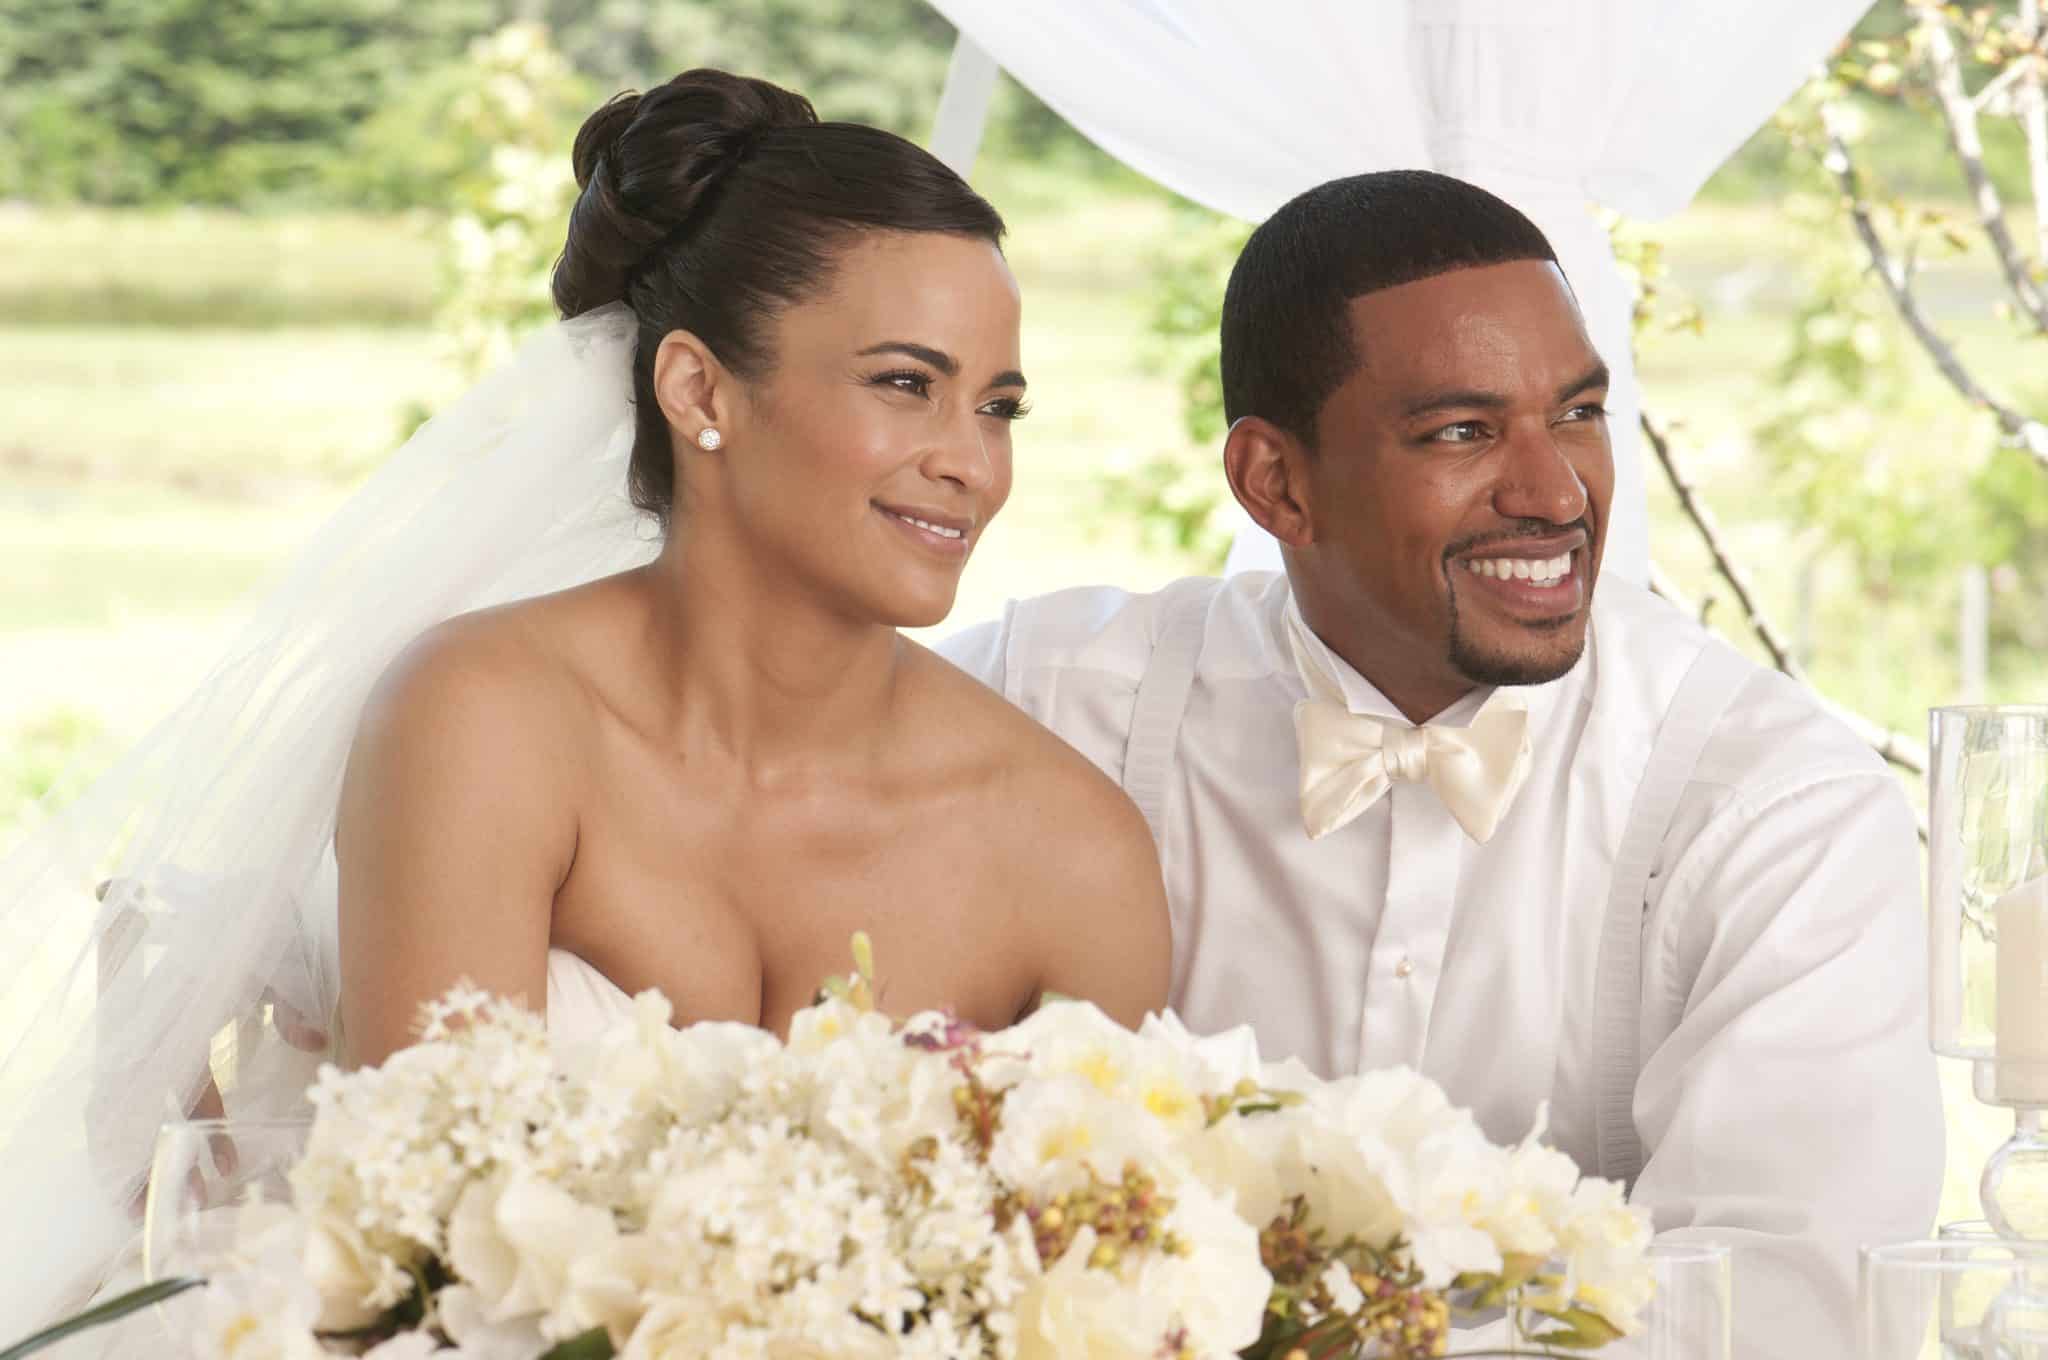 Jumping The Broom (2011)